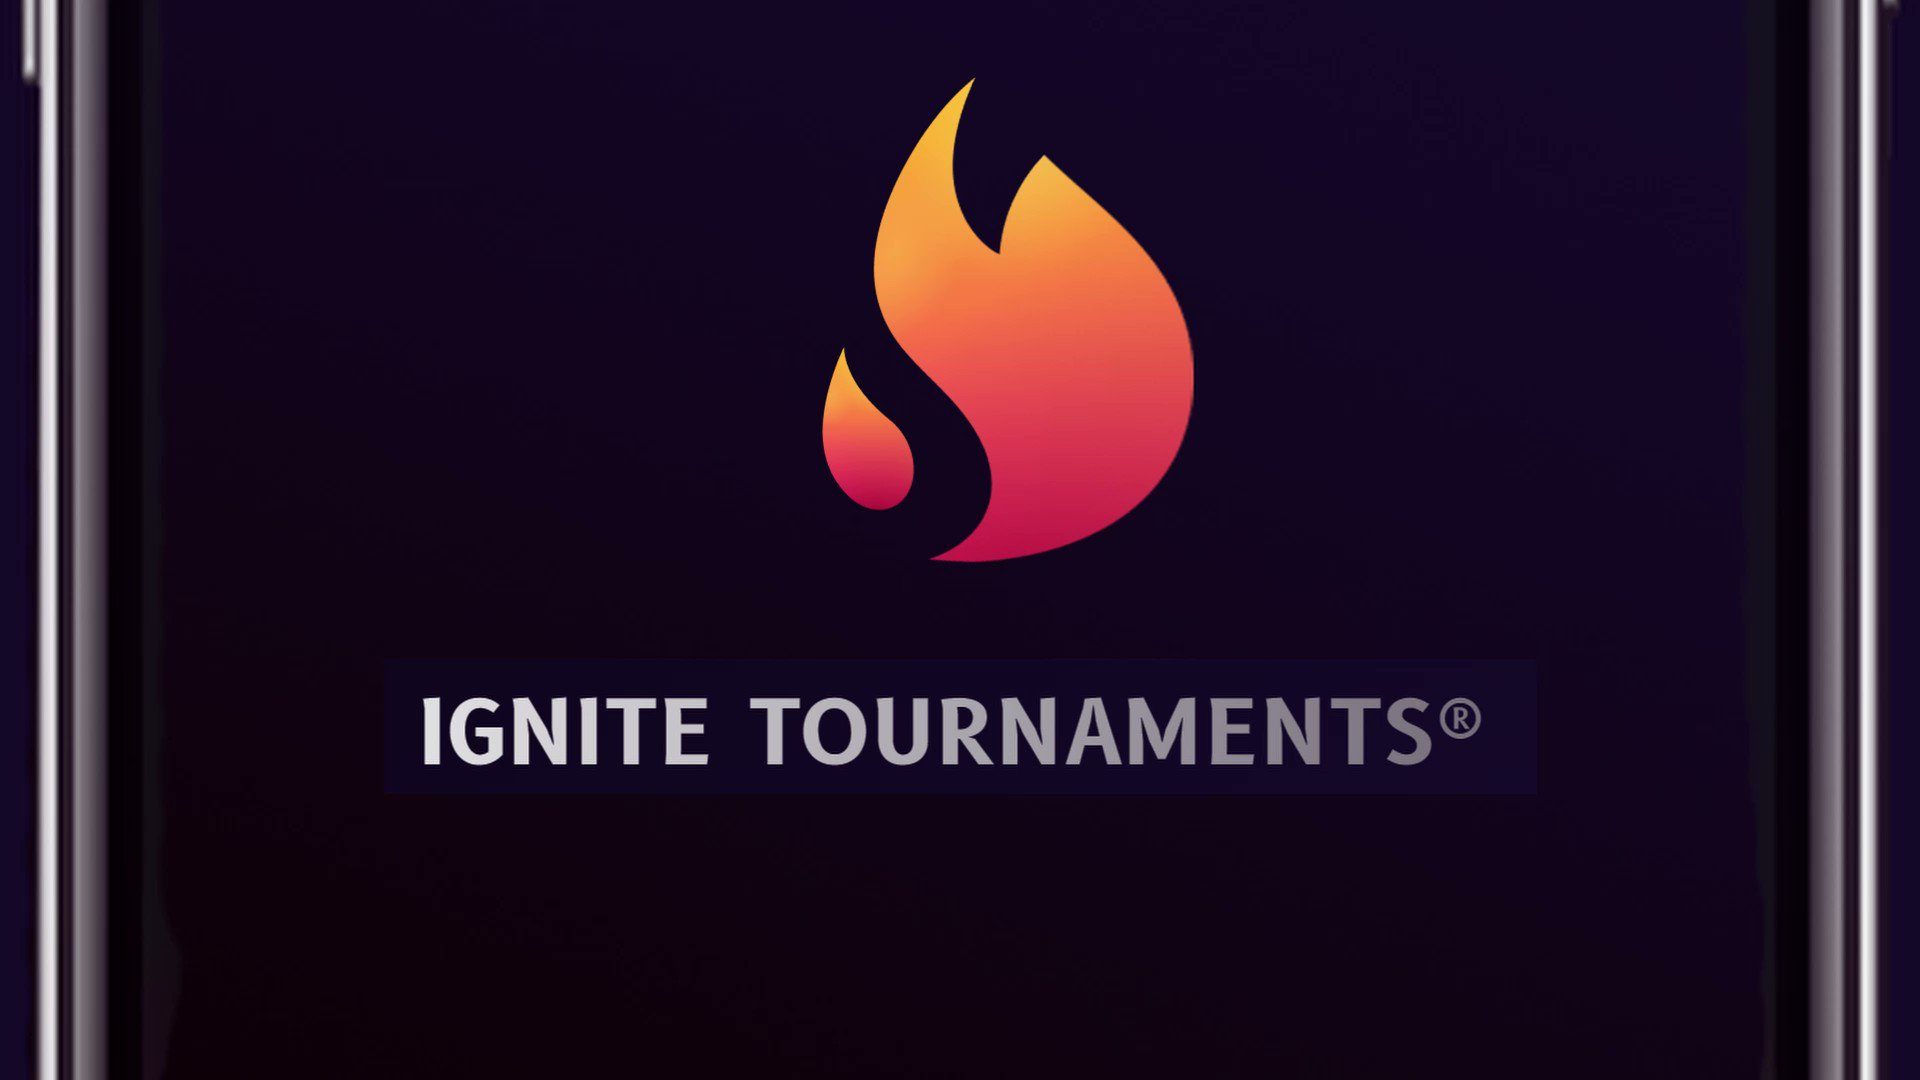 Ignite Tournaments on the verge of a breakthrough?